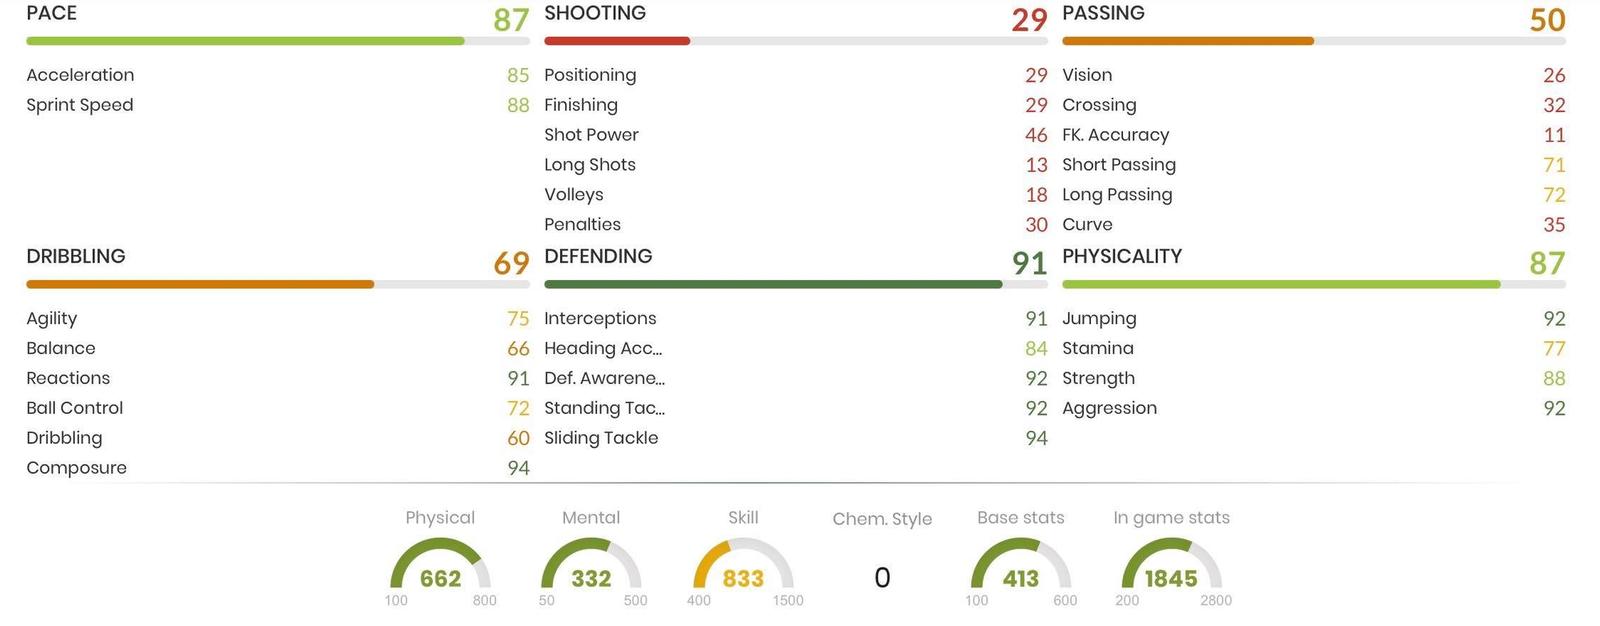 Manolas In Game Stats